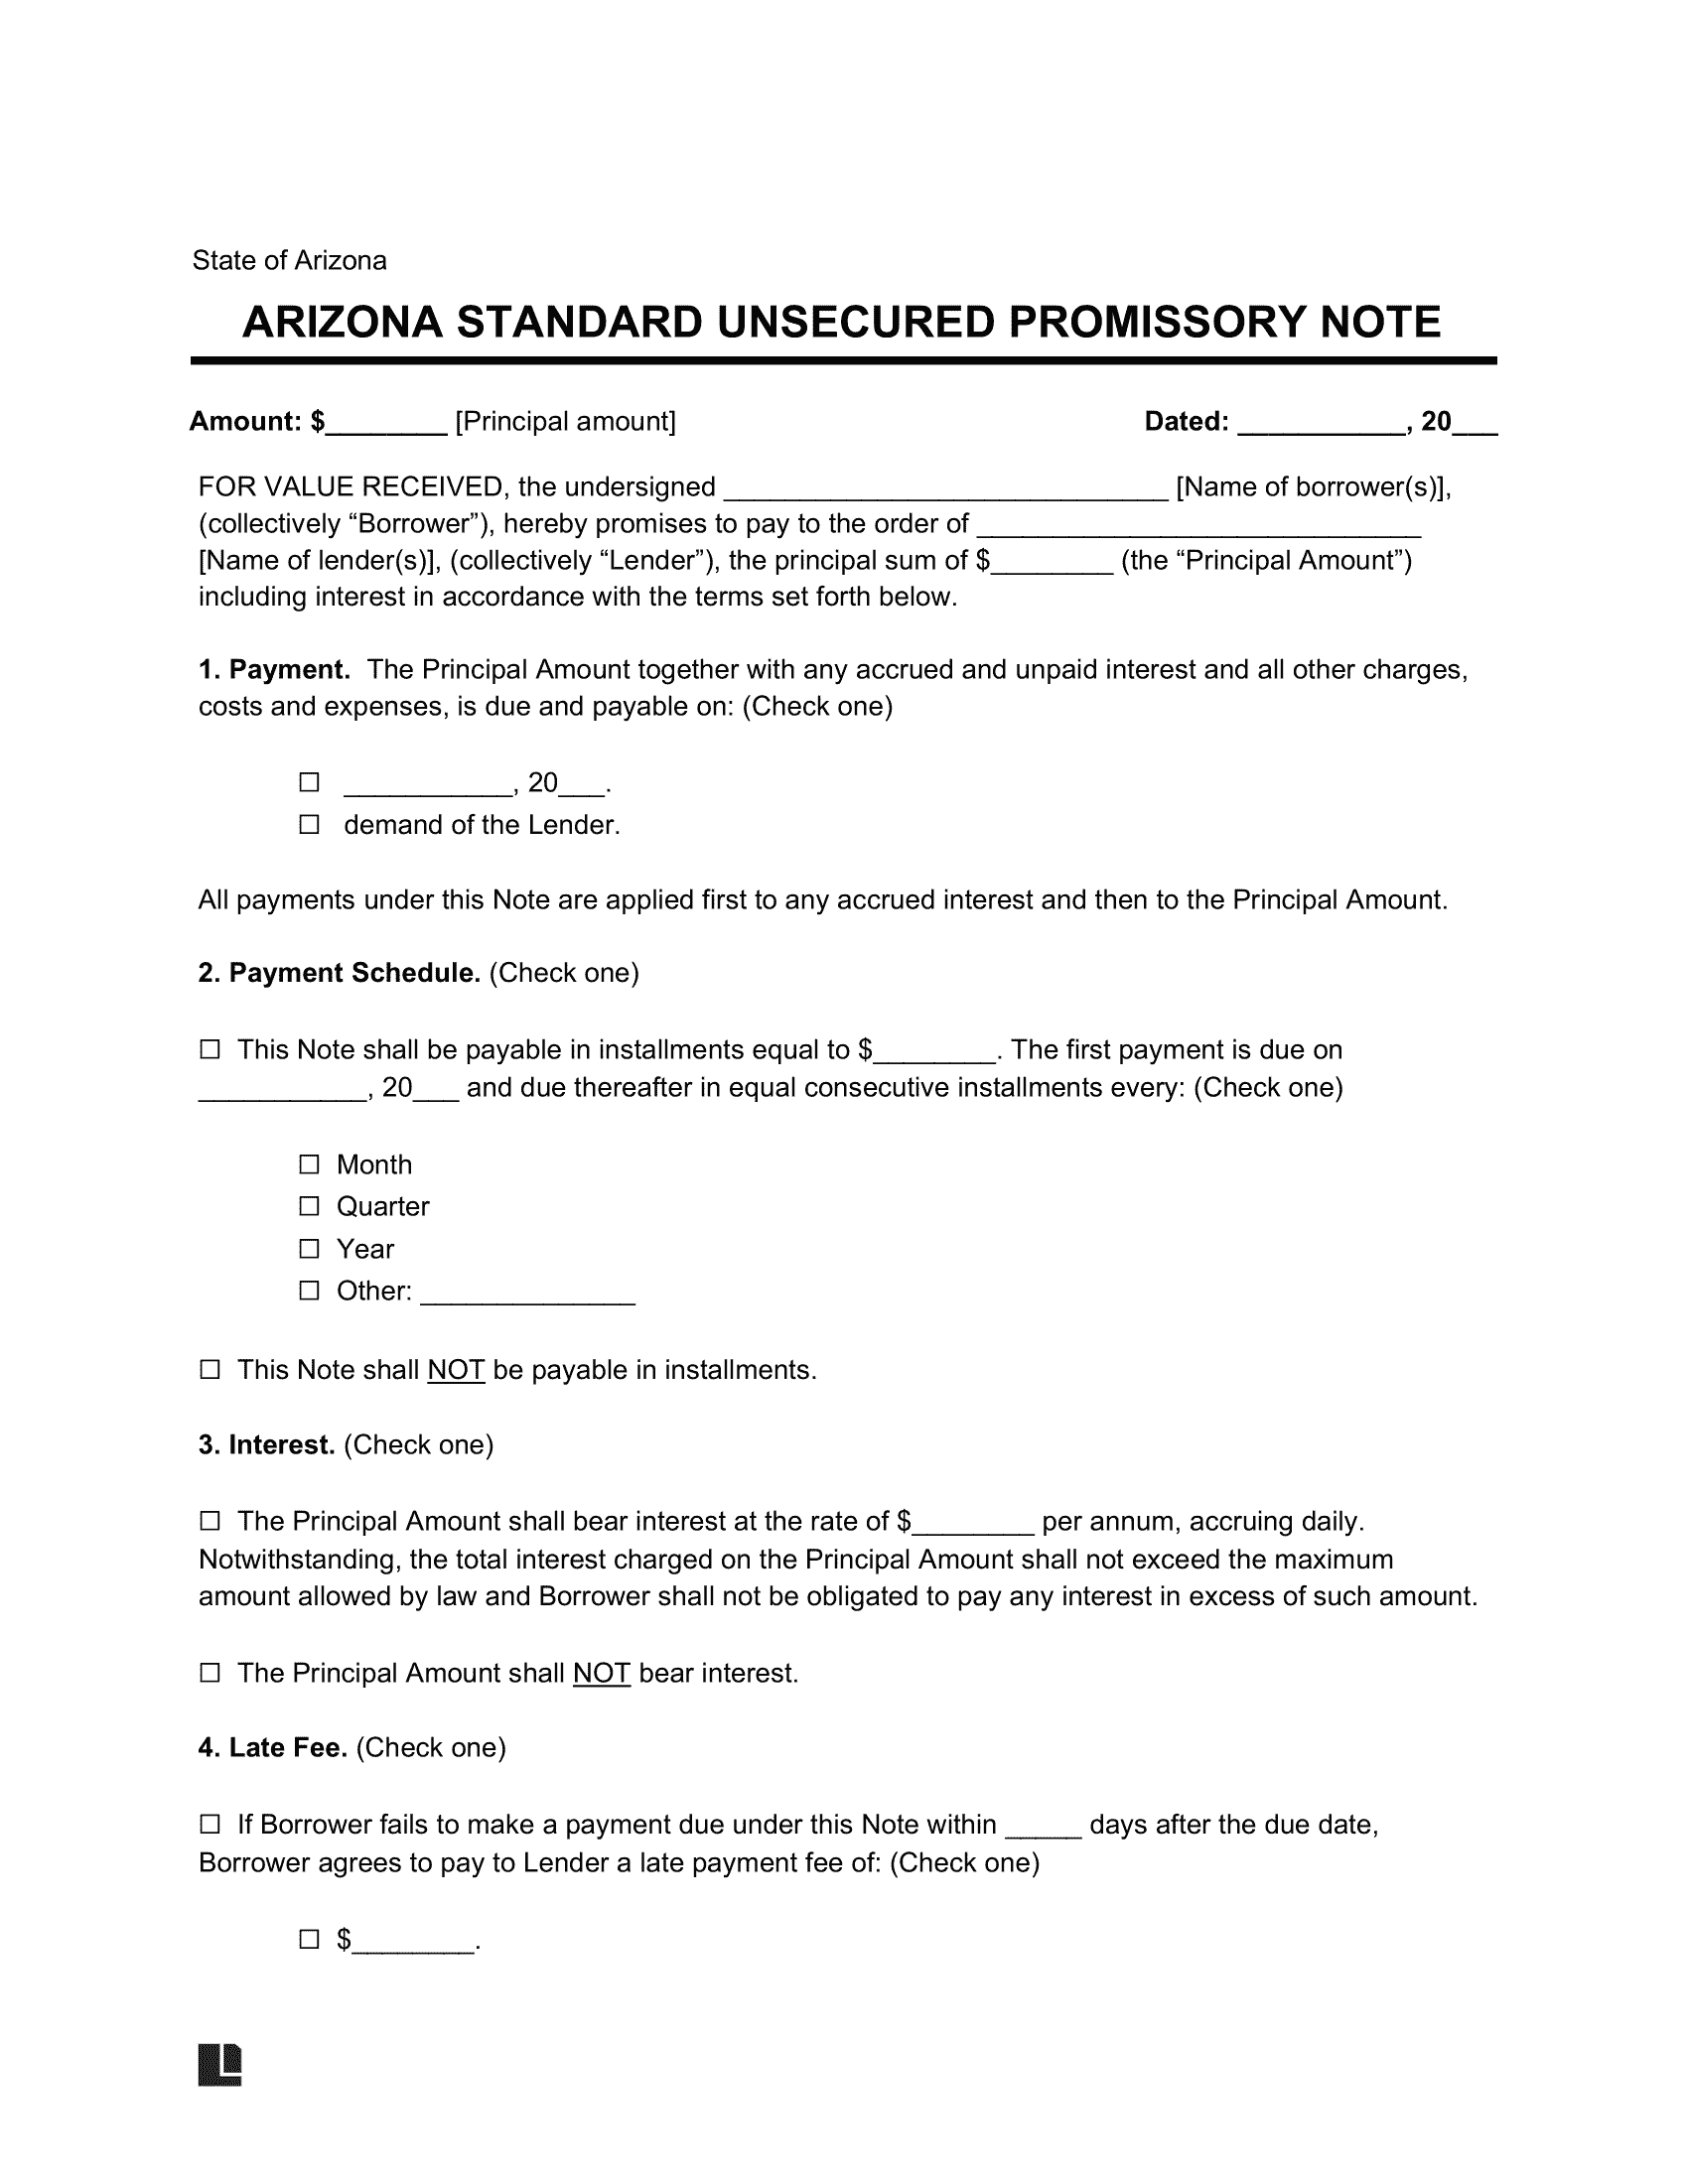 Arizona Standard Unsecured Promissory Note Template